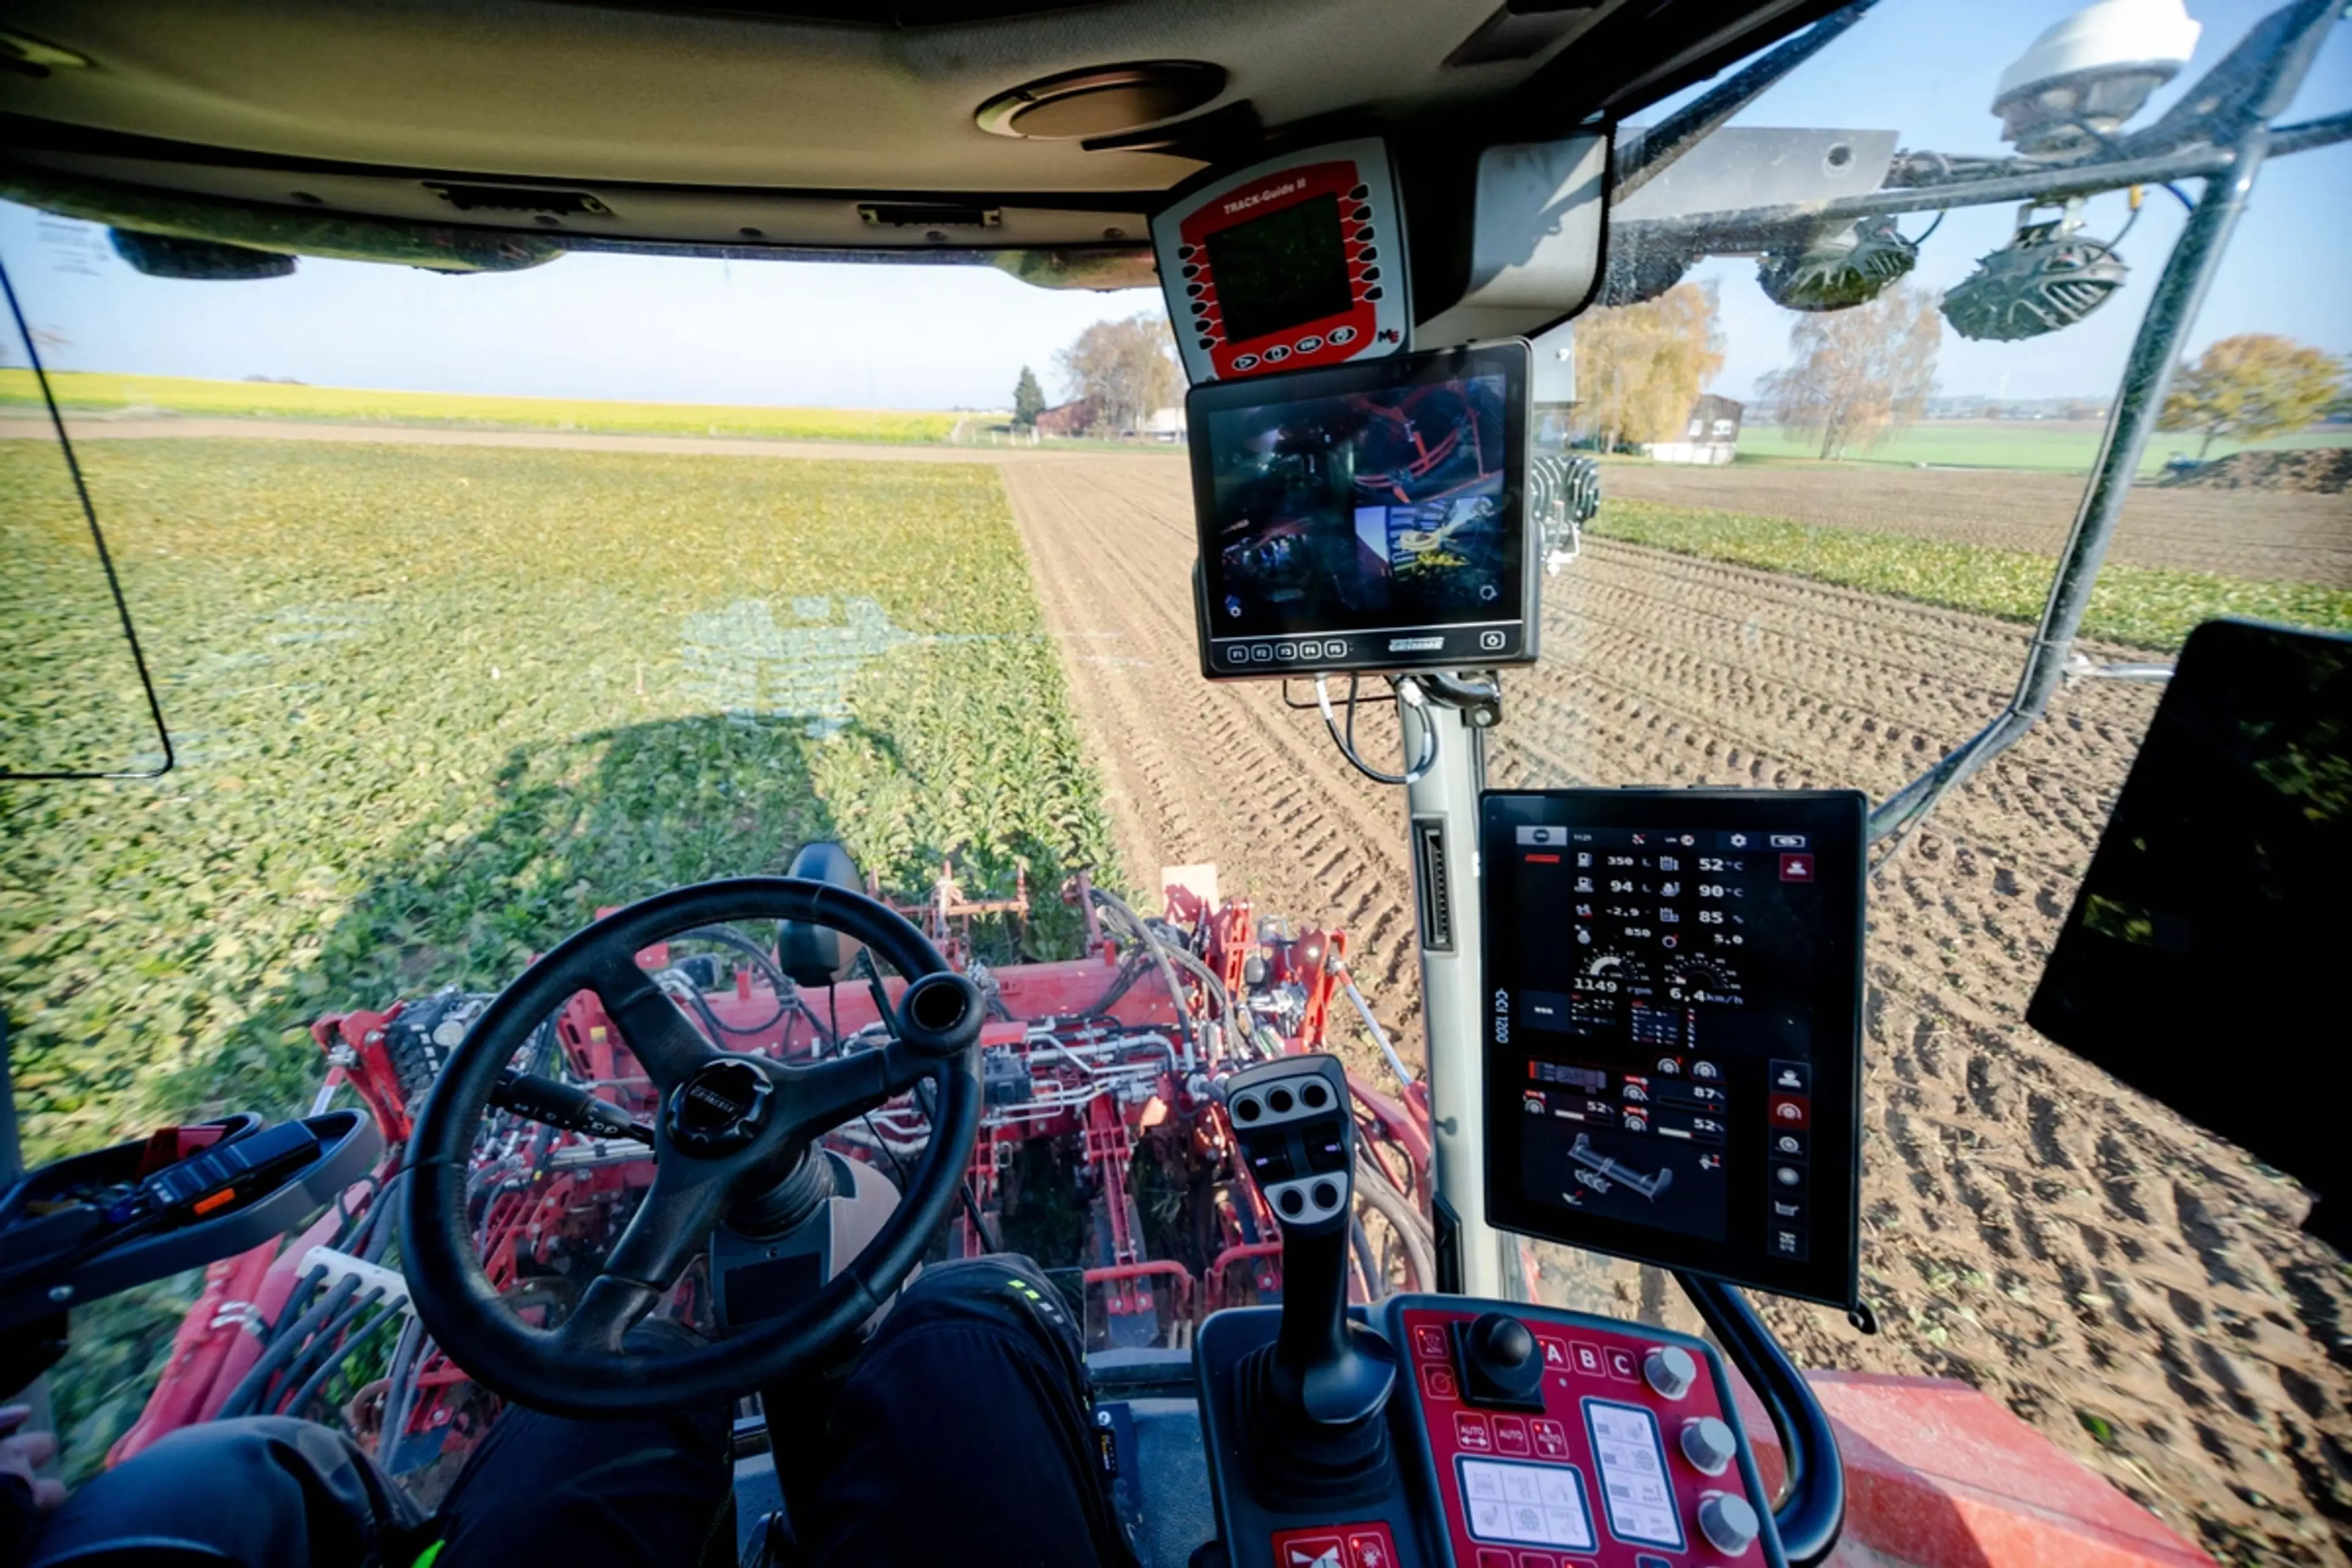 The new operating design consist of the latest CCI 1200 control terminal, GRIMME's own digital video system " SmartView" and the driver assistance systems making everyday work easier.